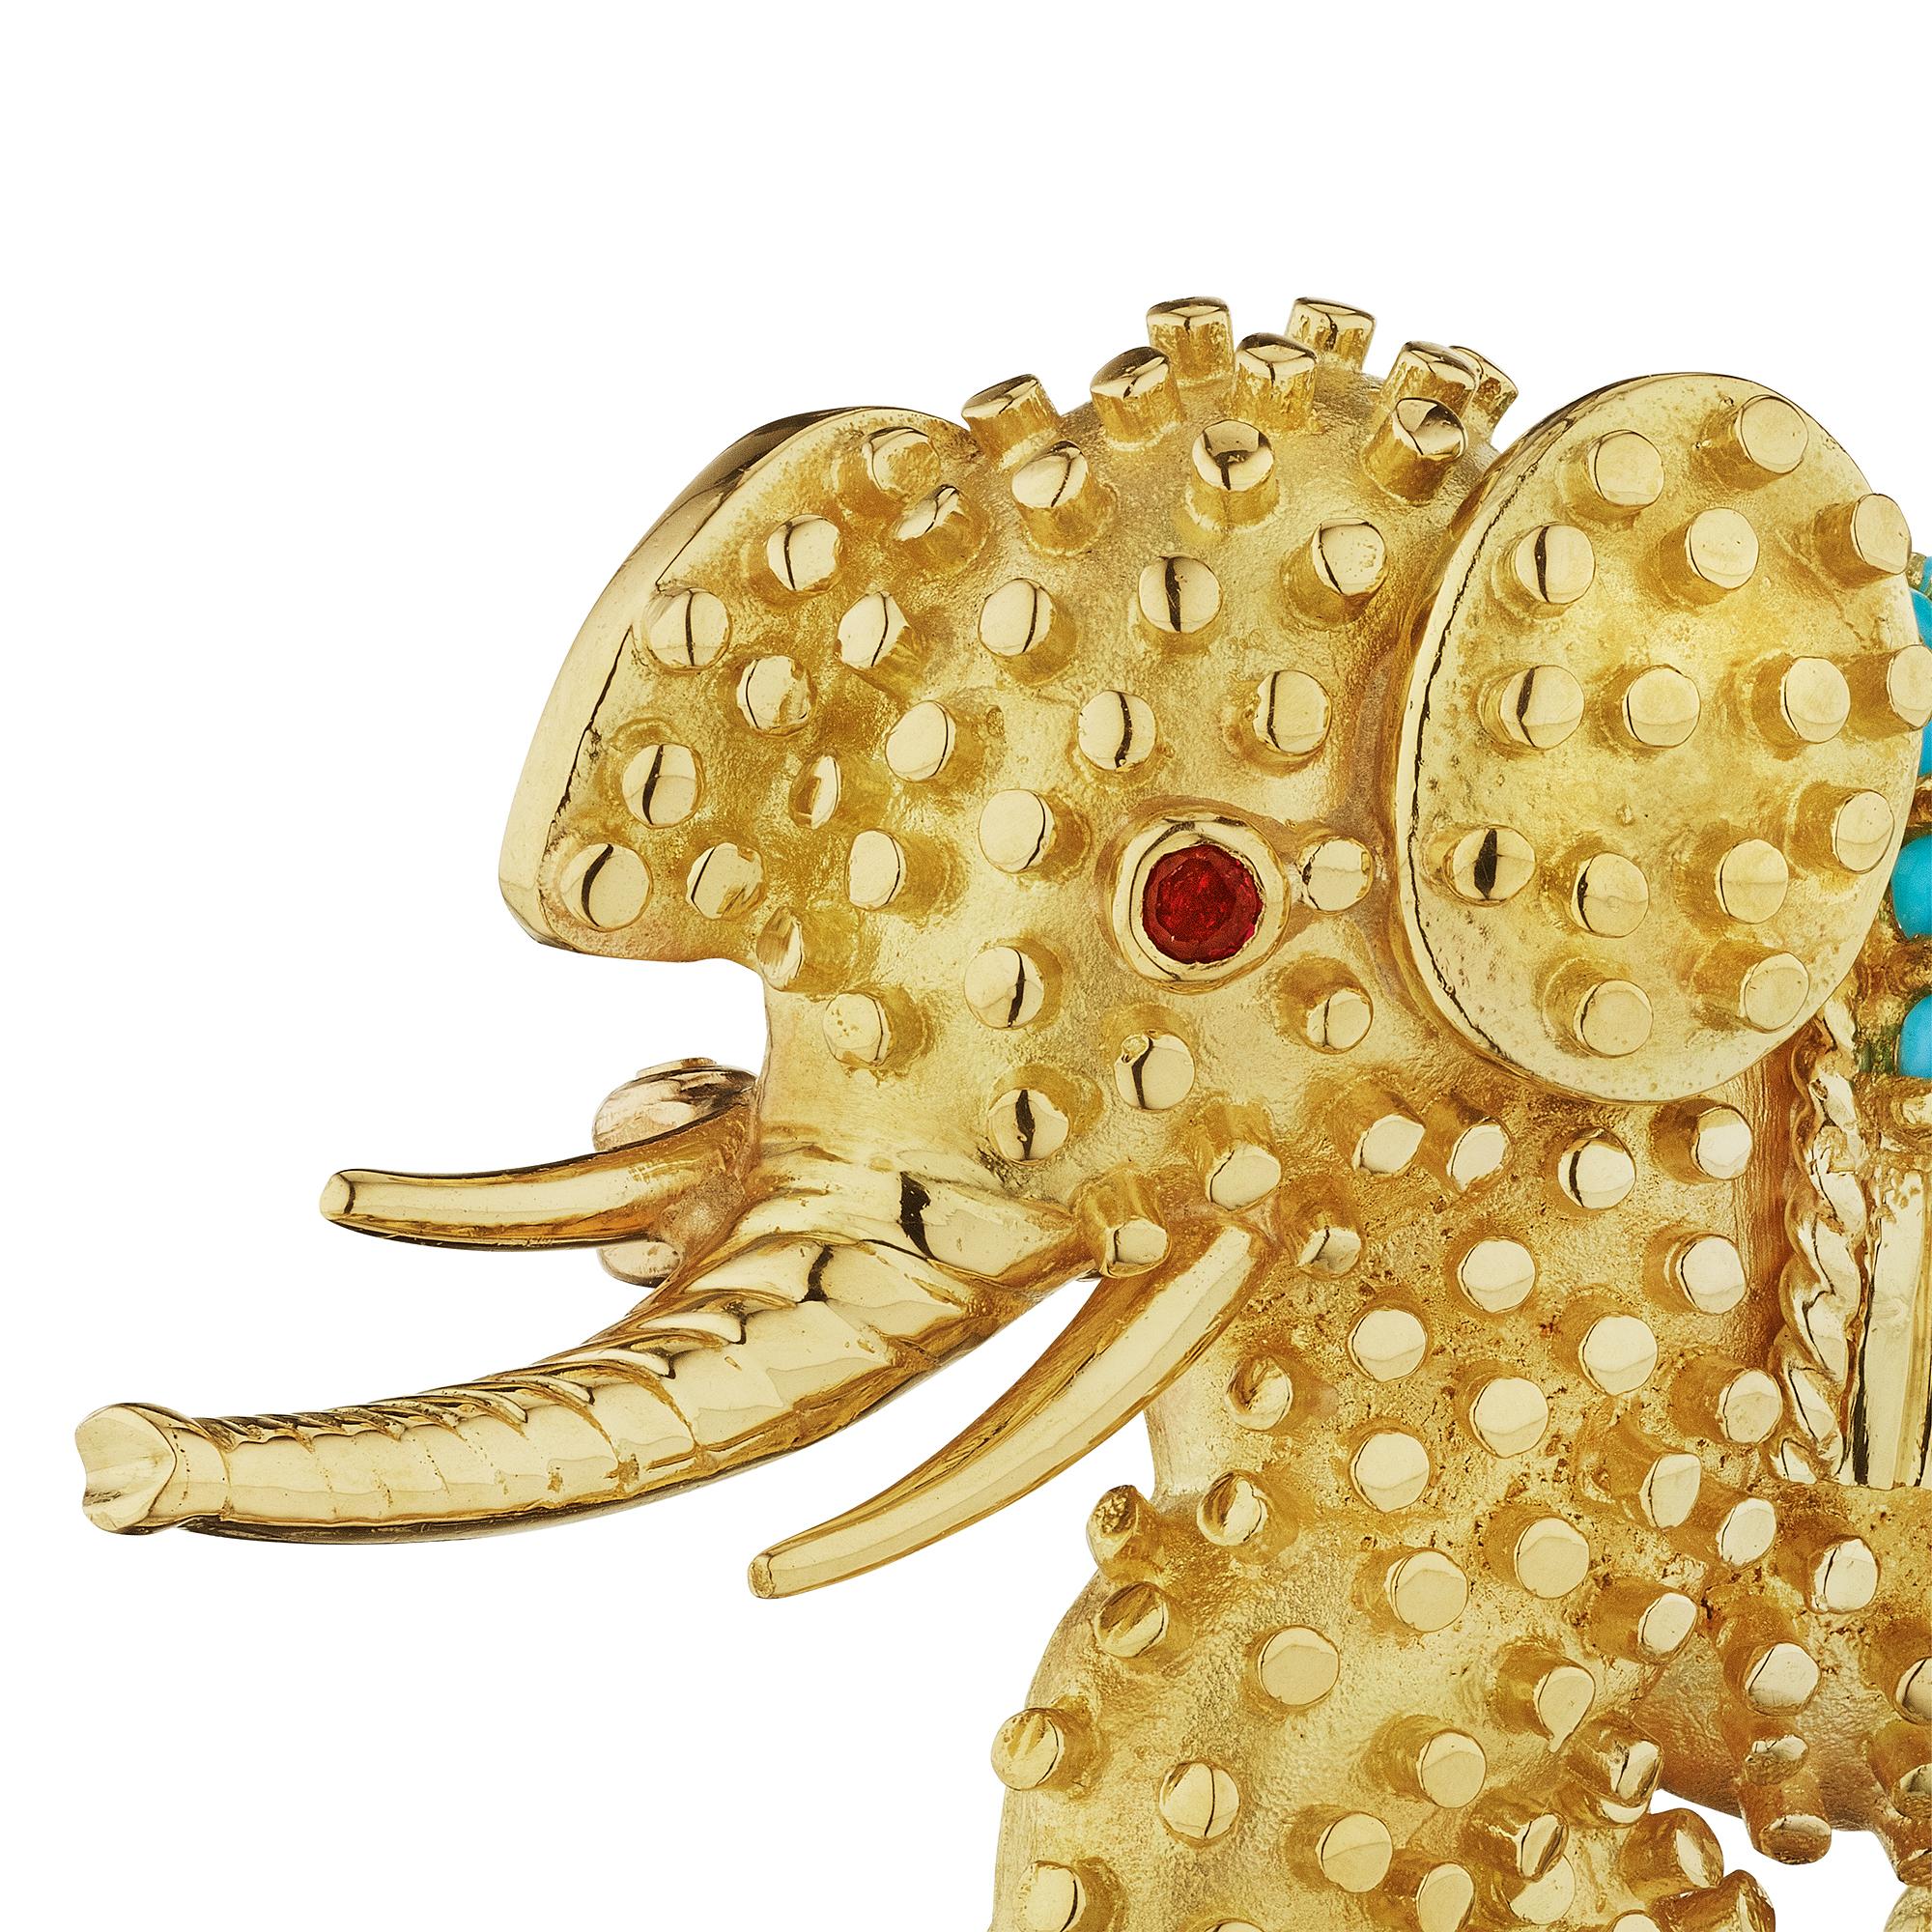 Symbolizing strength and good fortune this Tiffany & Co. vintage ruby, turquoise, and 18 karat yellow gold elephant brooch will lead the way to all good things.  Walking proudly with his trunk up for good luck, this is a one-of-a-kind and